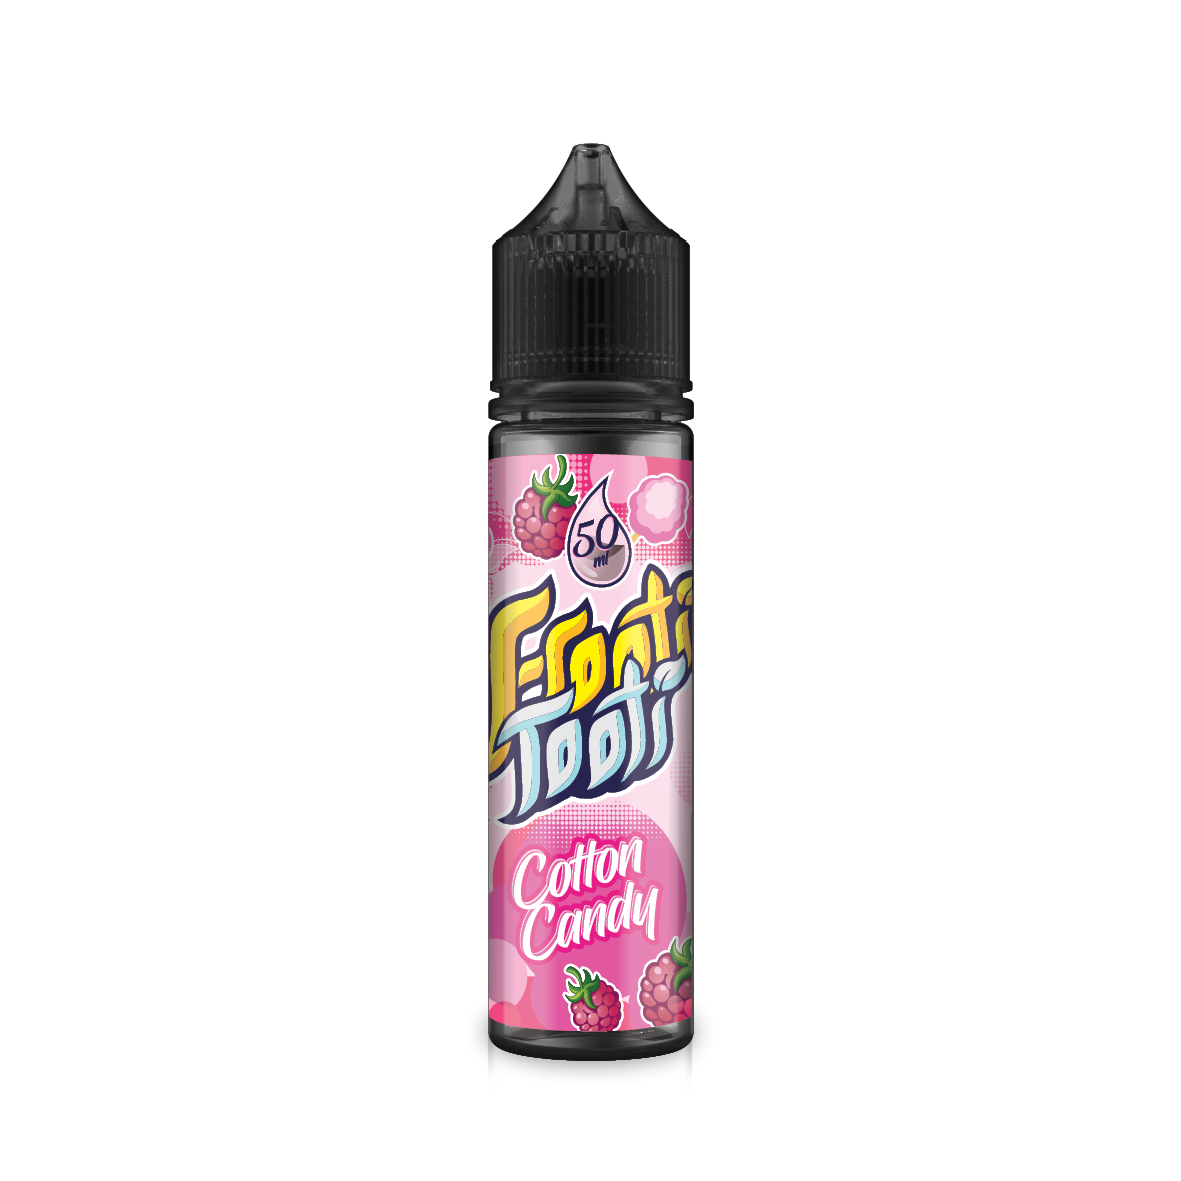 Cotton candy 50ml Frooti Tooti